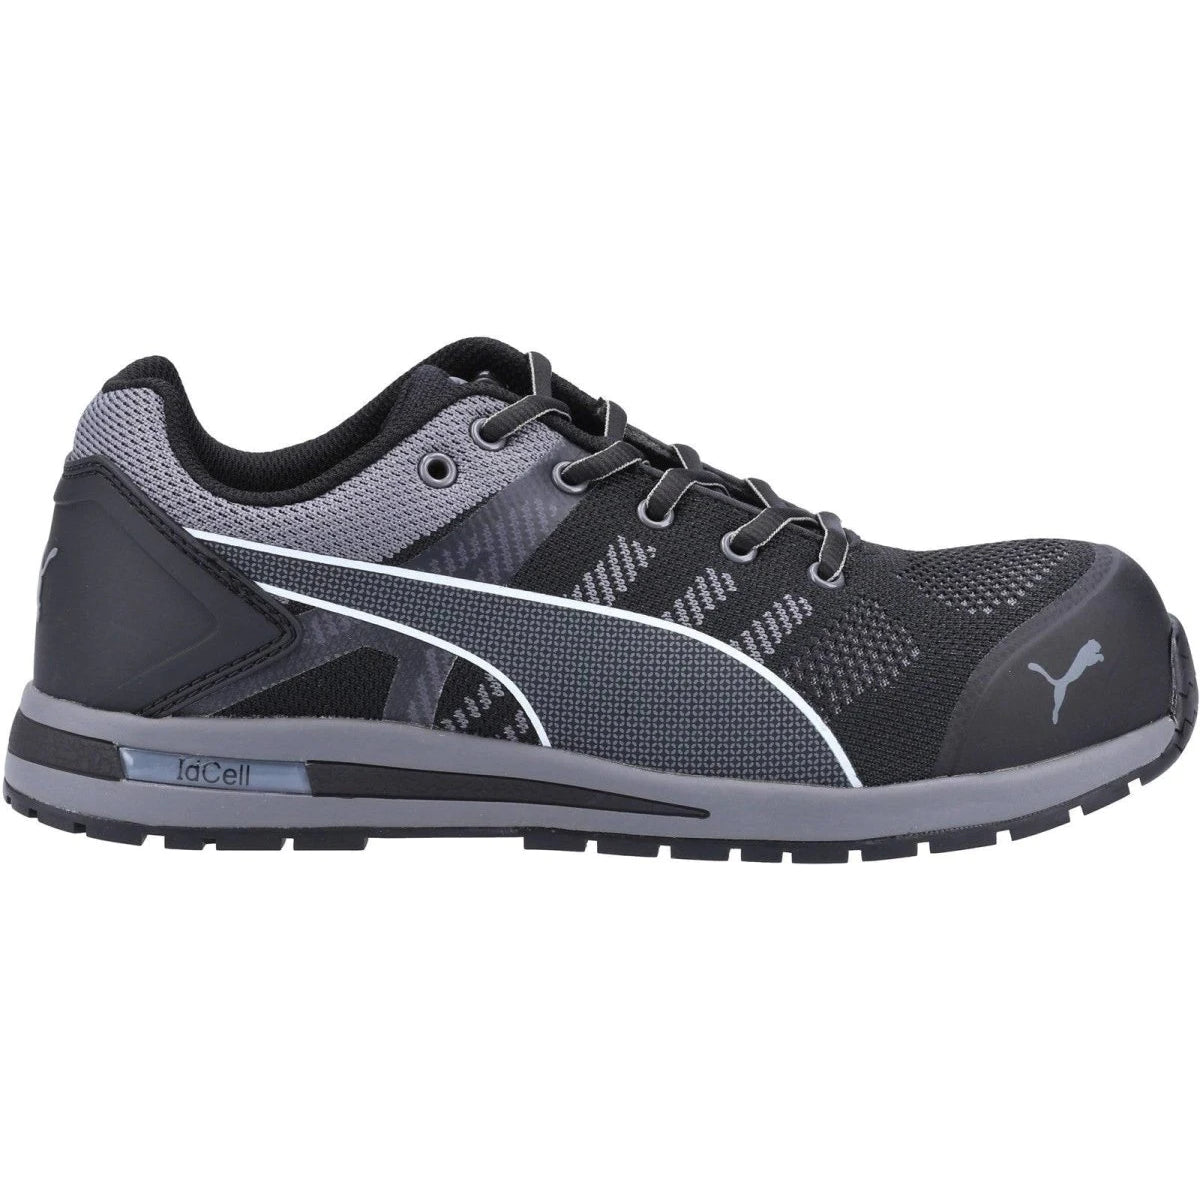 Puma Elevate Knit Low S1P Safety Shoe - Shoe Store Direct